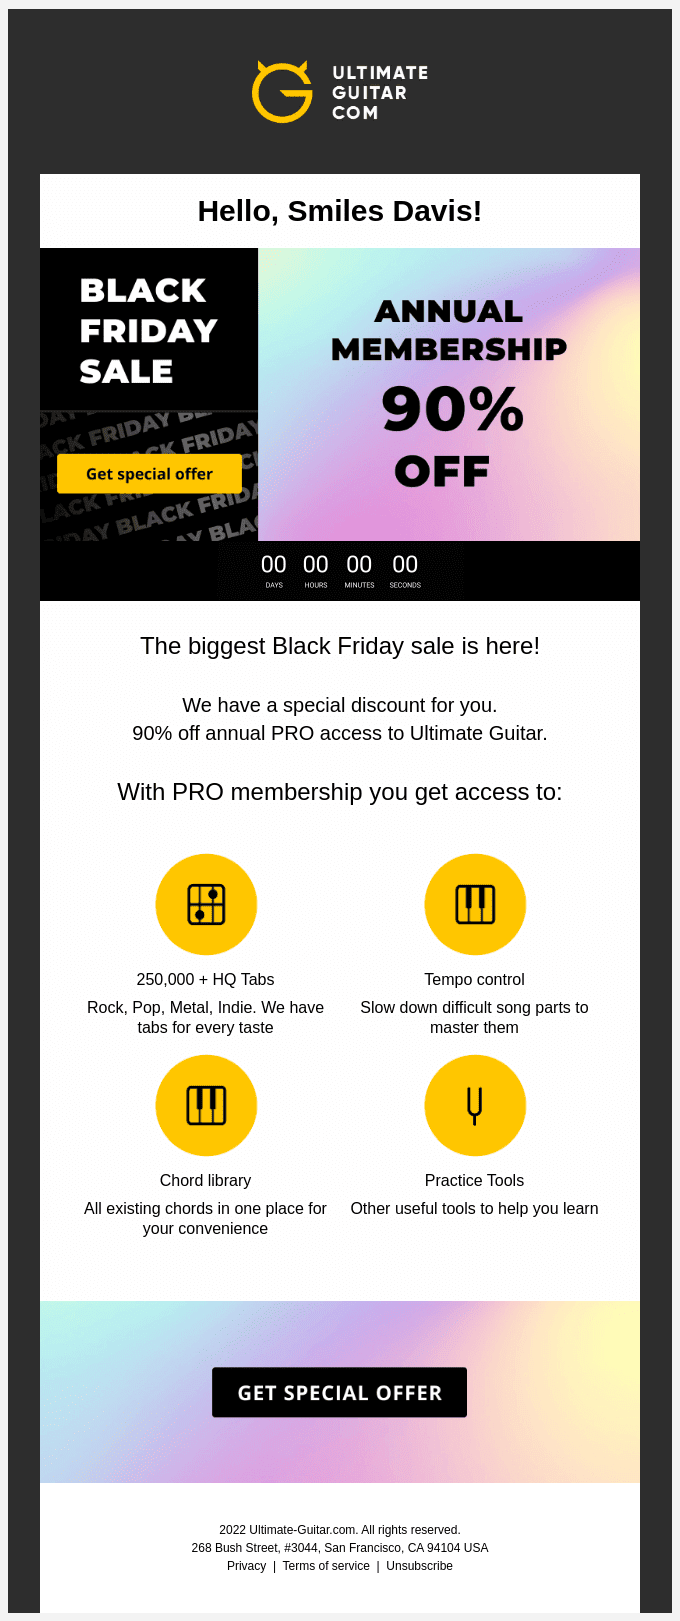 Ultimate Guitar's Black Friday marketing email